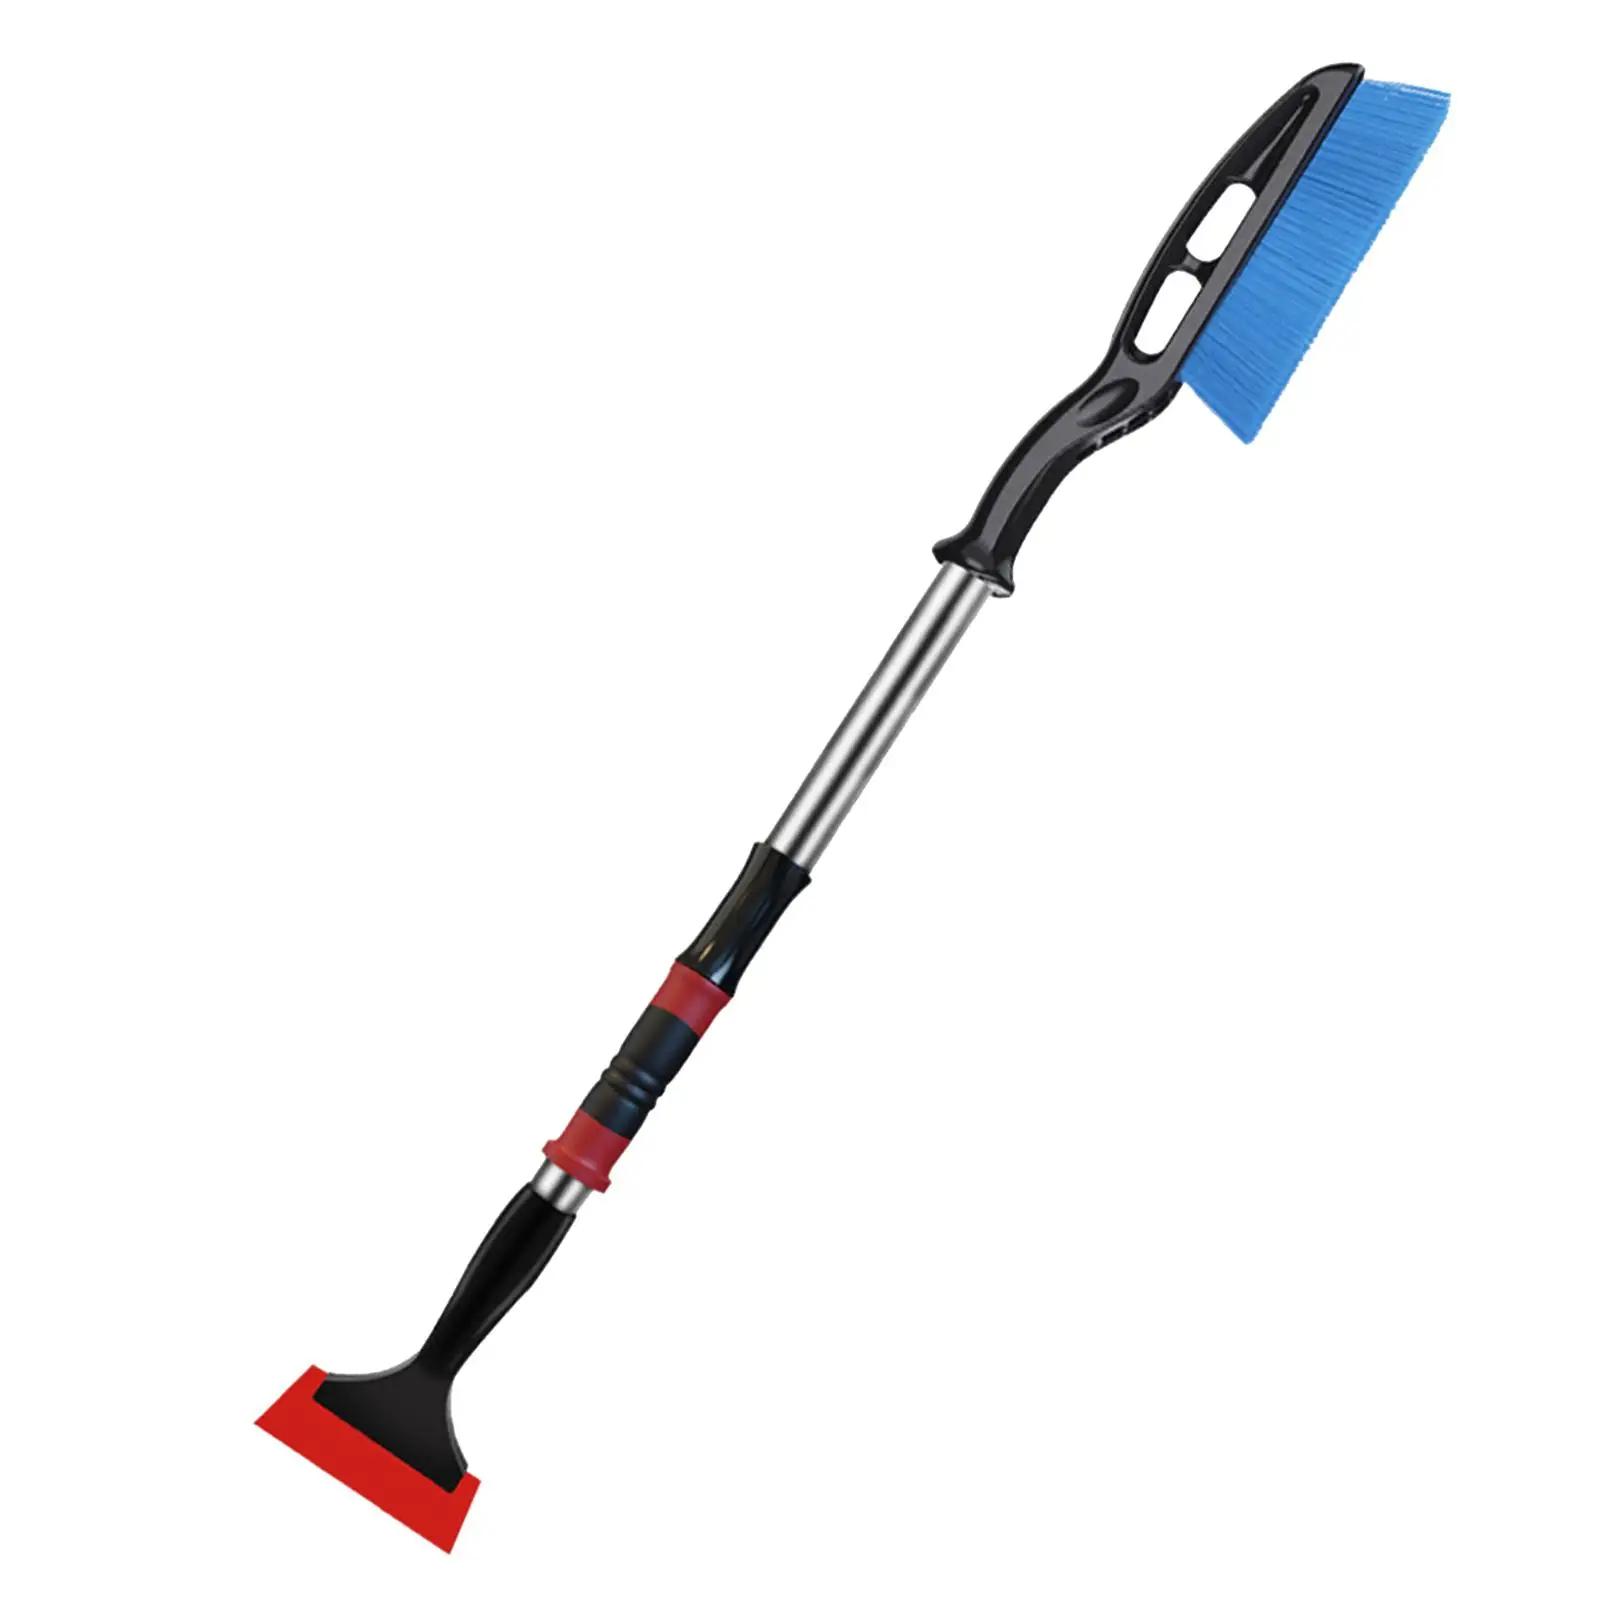 Car Snow Removal Brush Shovel Lightweight Snow Cleaning for Windows SUV